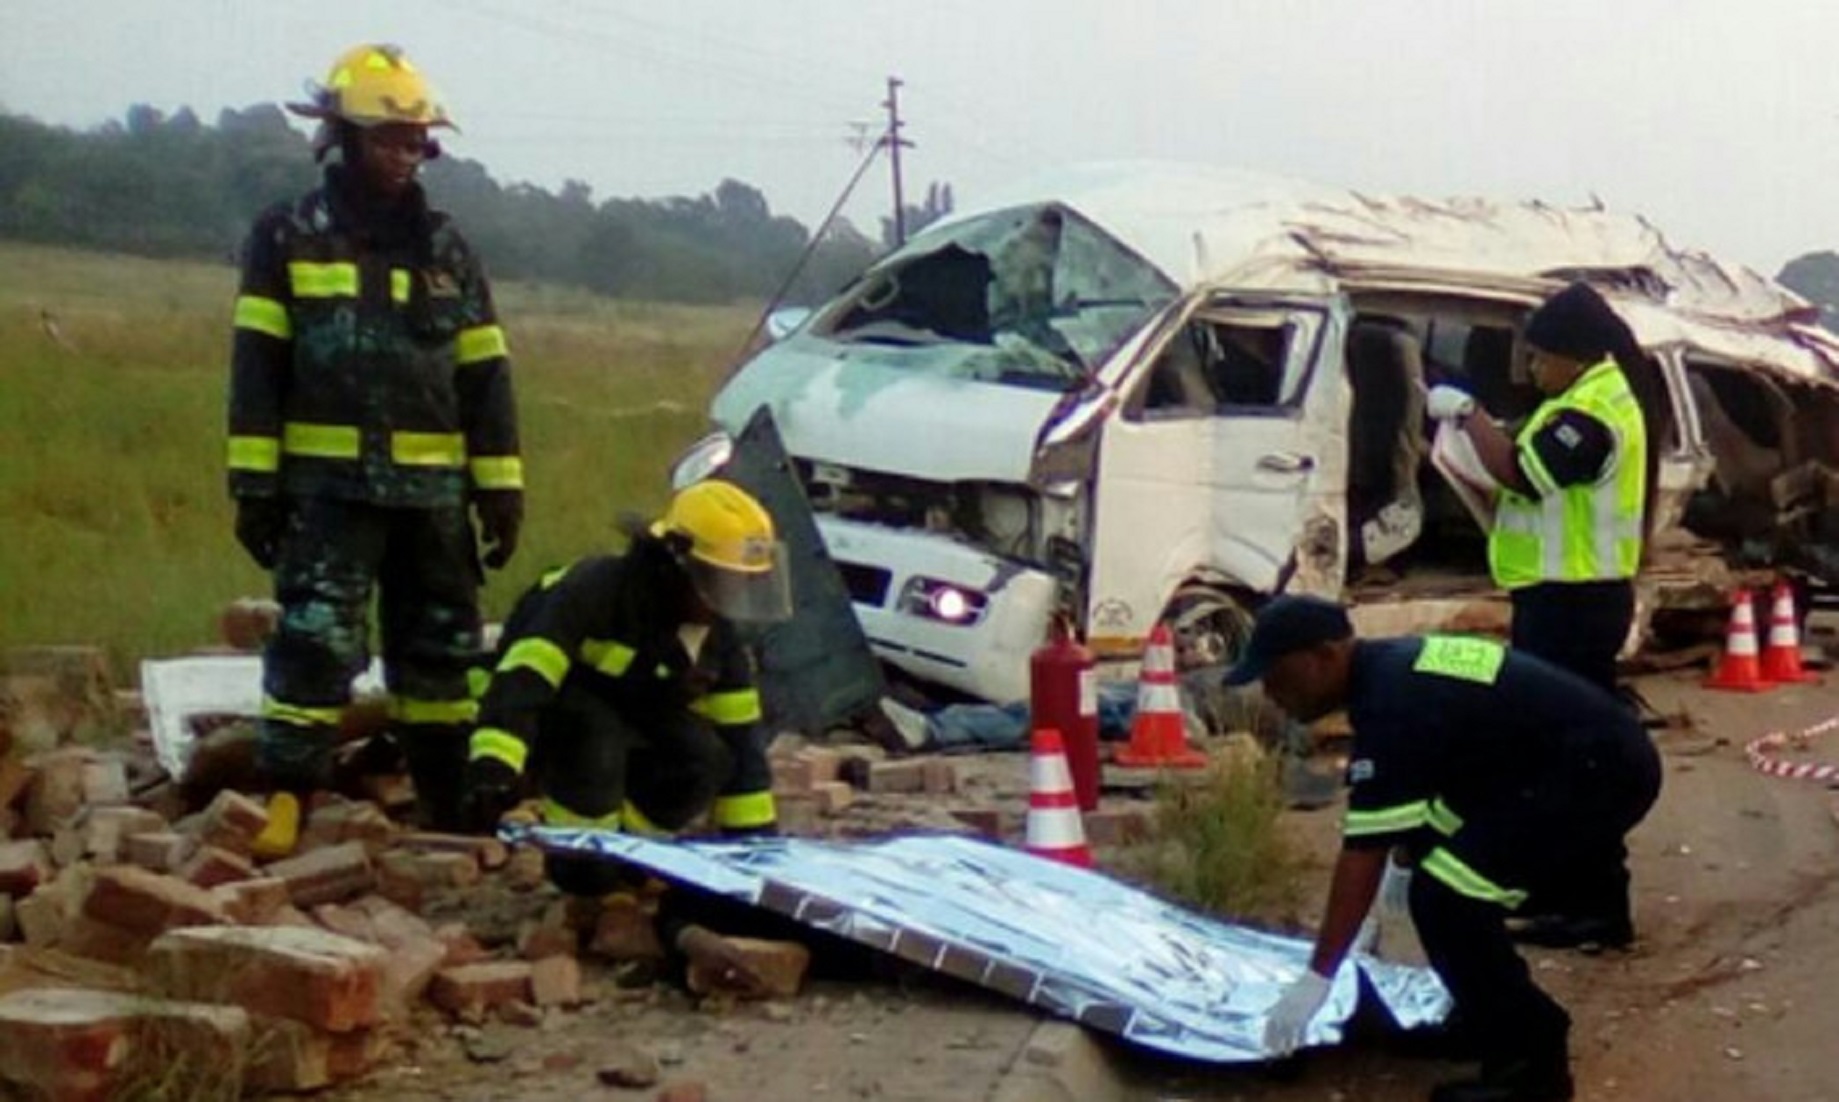 13 Dead, Three Seriously Injured In Vehicle Collision In Angola